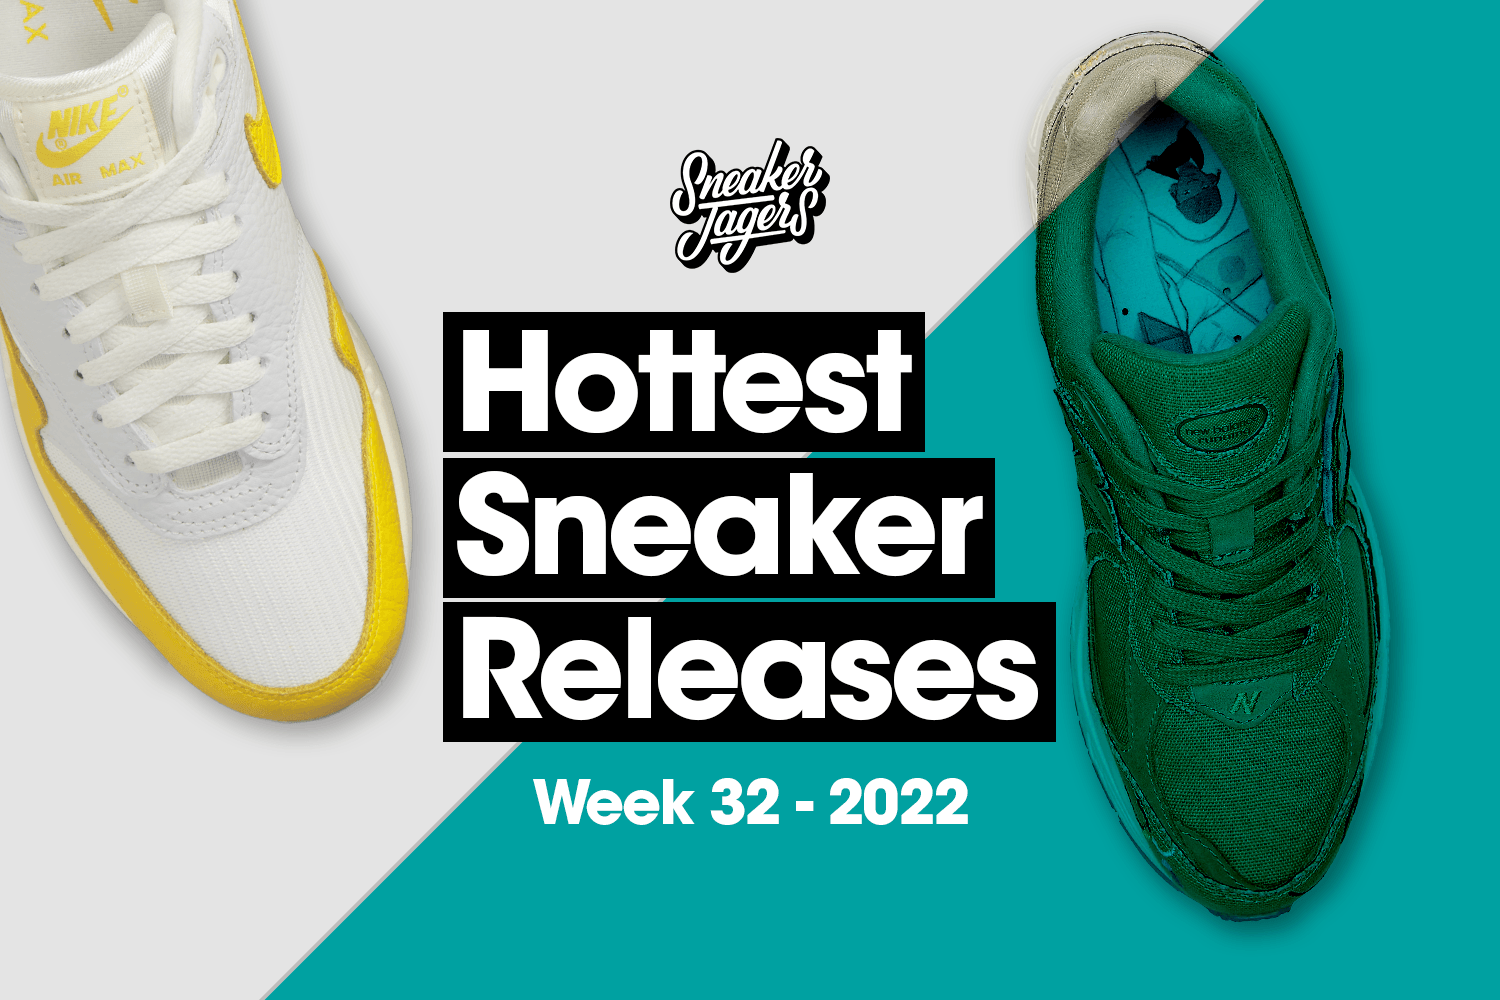 The Hottest Sneaker Releases - WK32